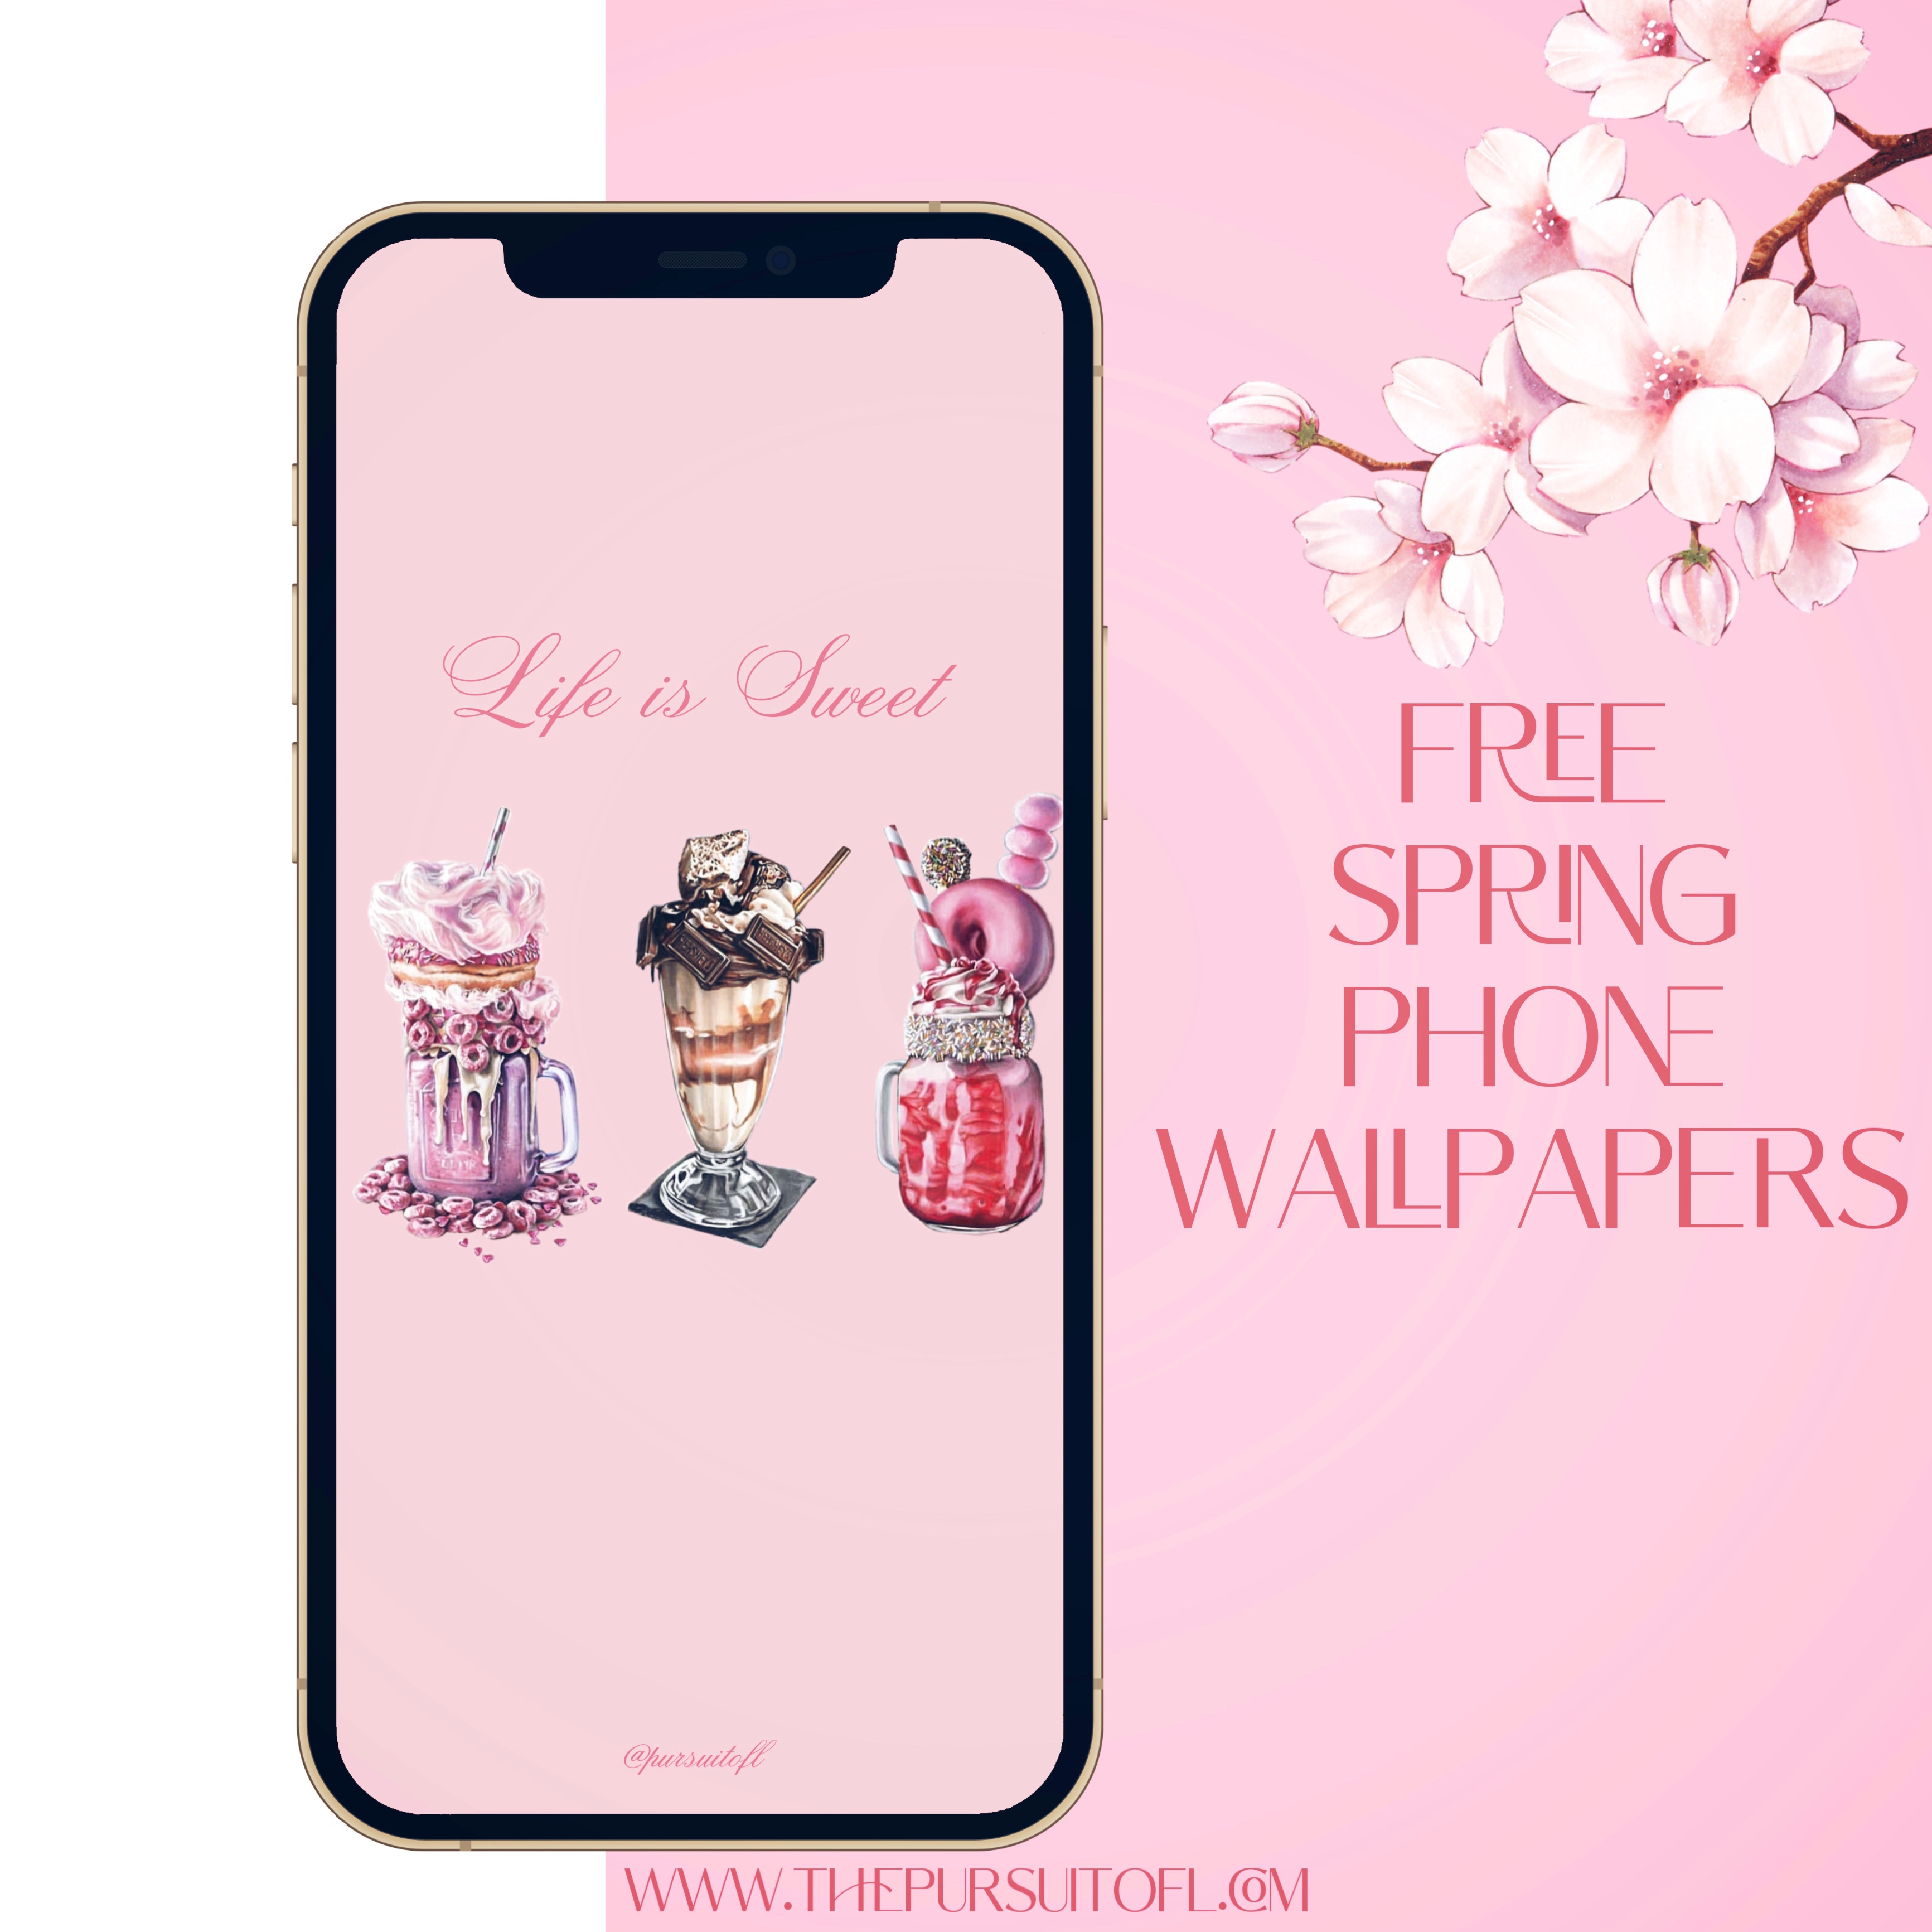 Free Spring Phone Wallpapers, The Pursuit of L